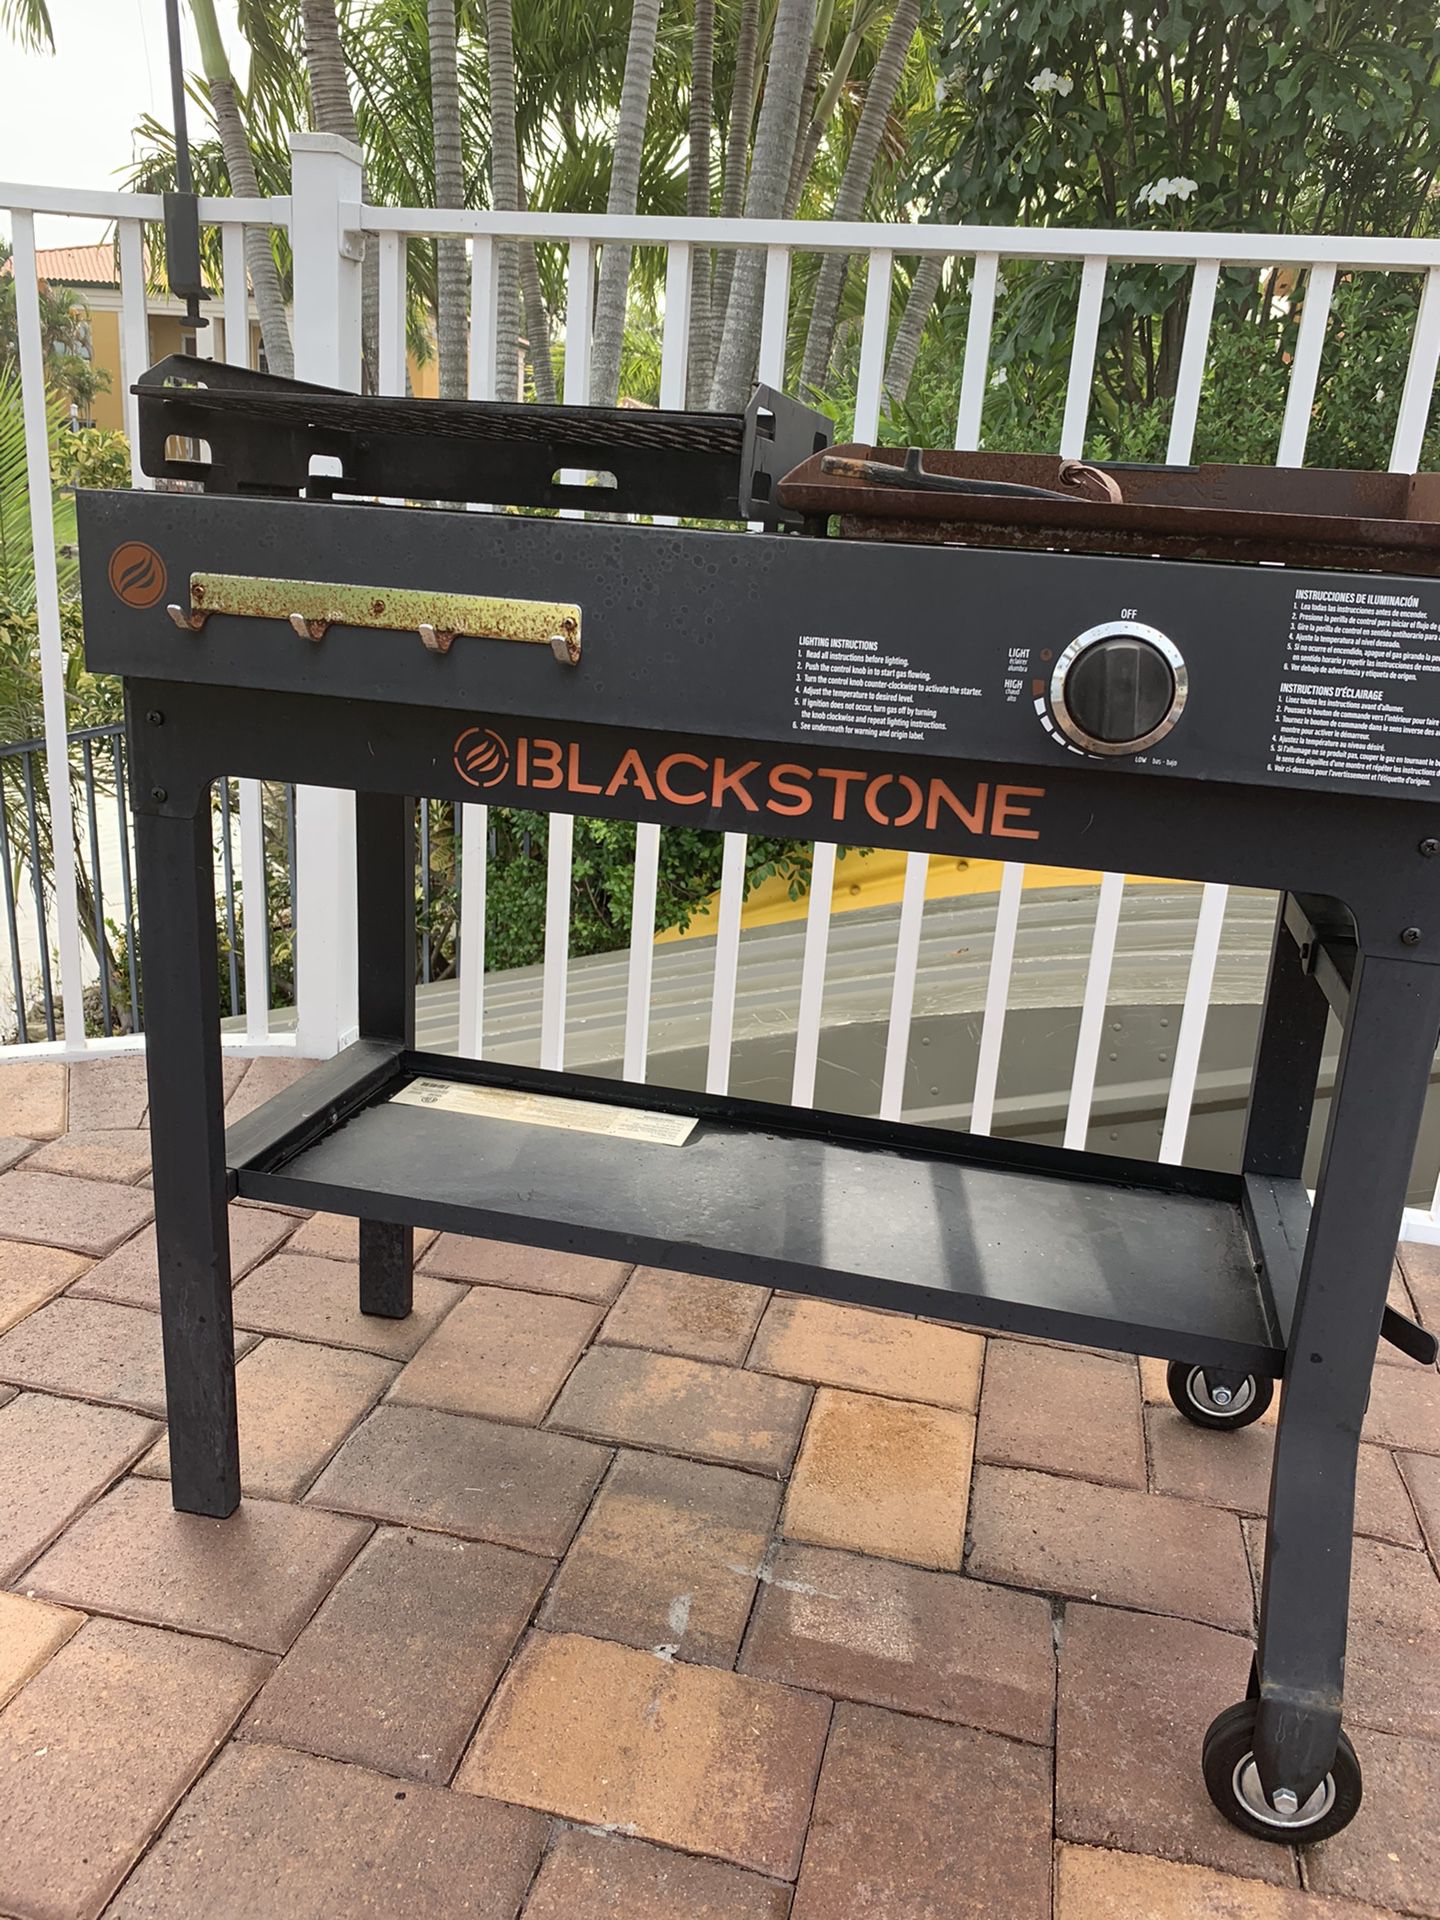 Black stone grill/ barbecue/ BBQ used once, must sell